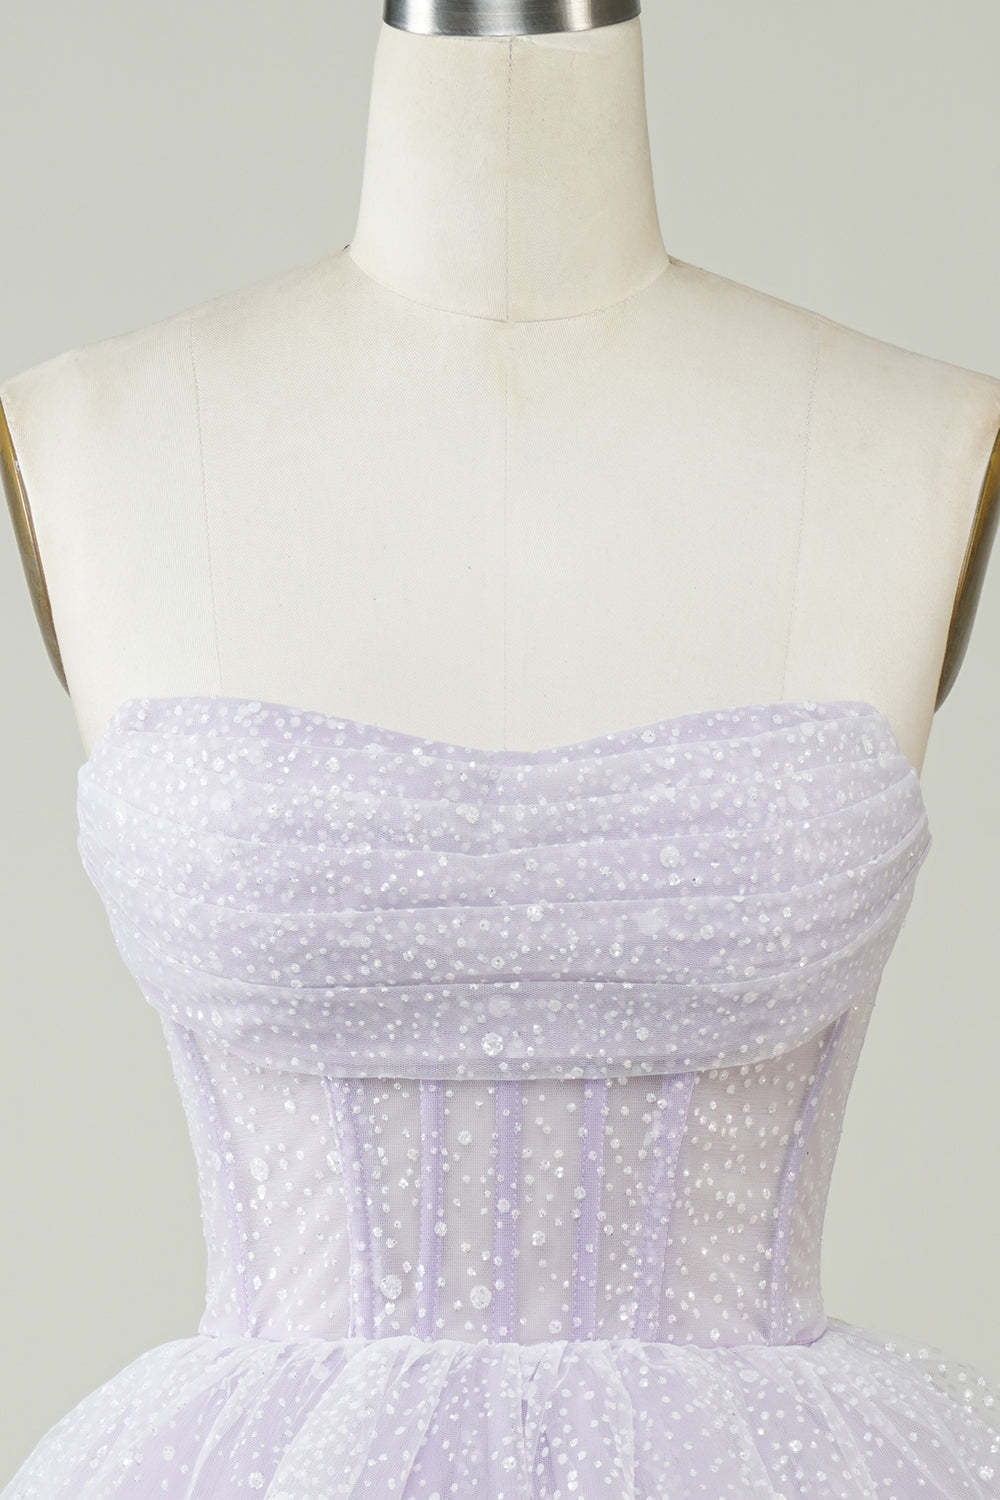 Princess A Line Strapless Lilac Corset Homecoming Dress with Ruffles